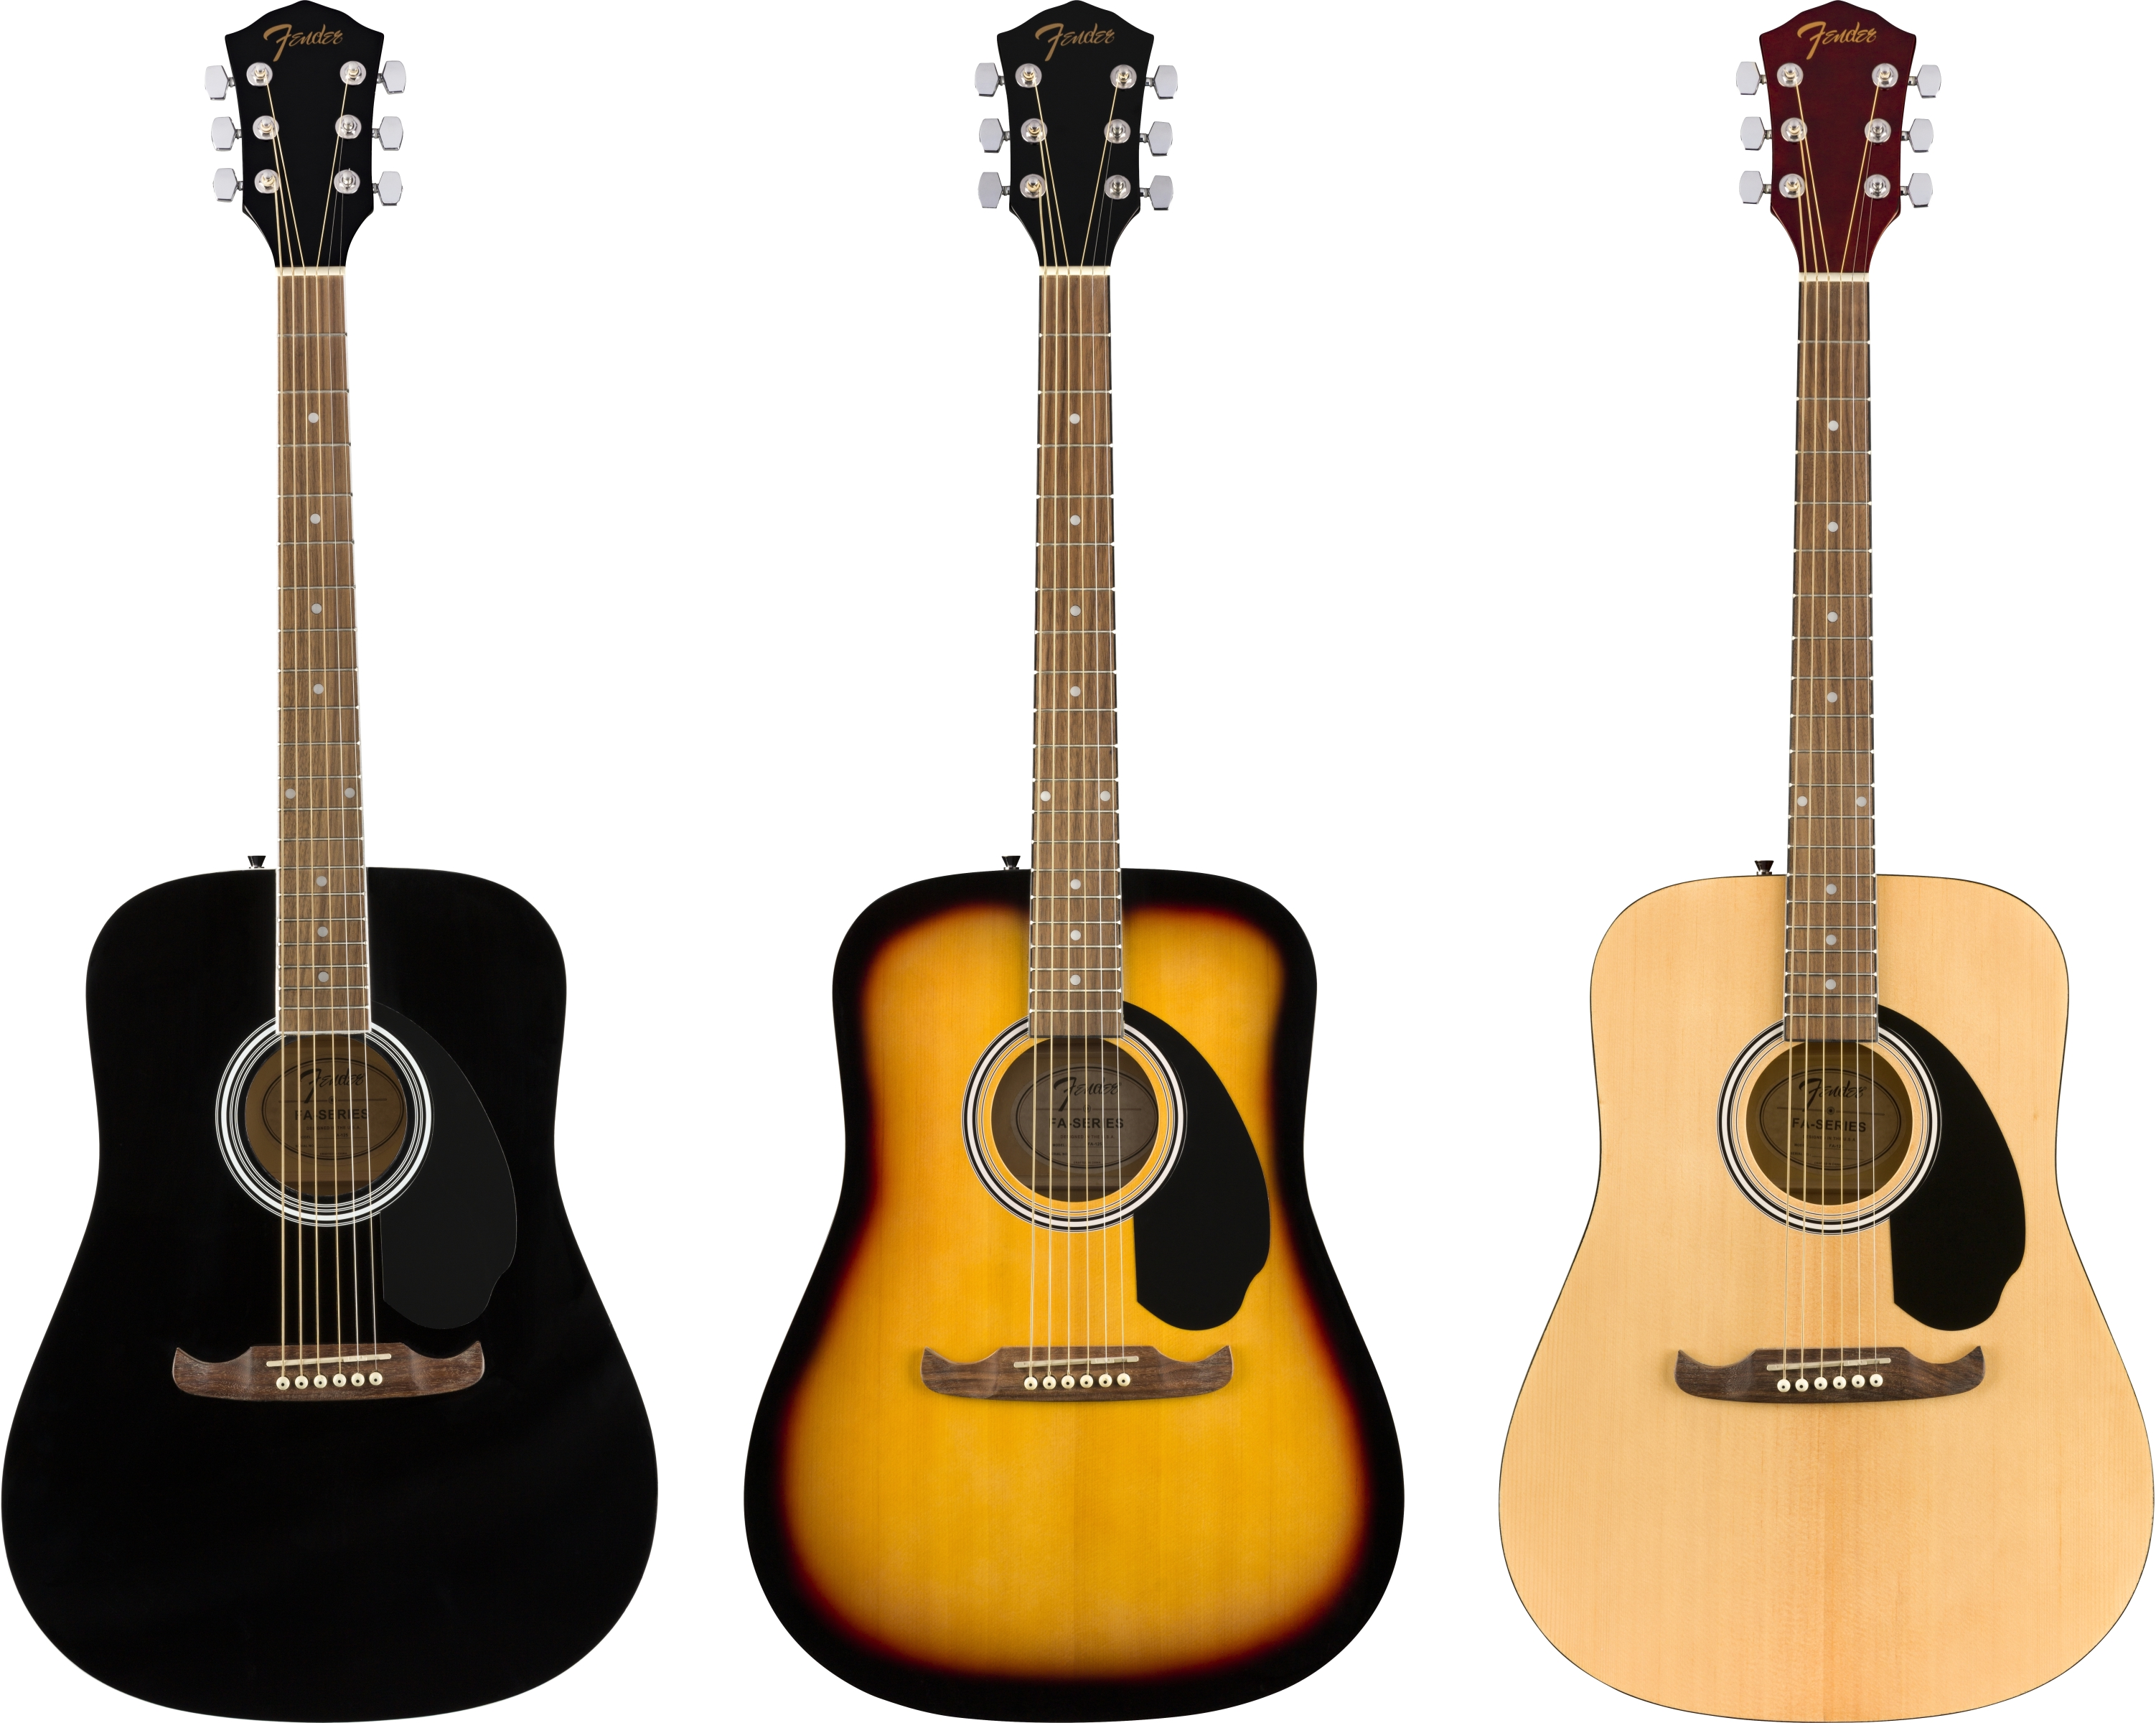 Fender FA-125 colors available